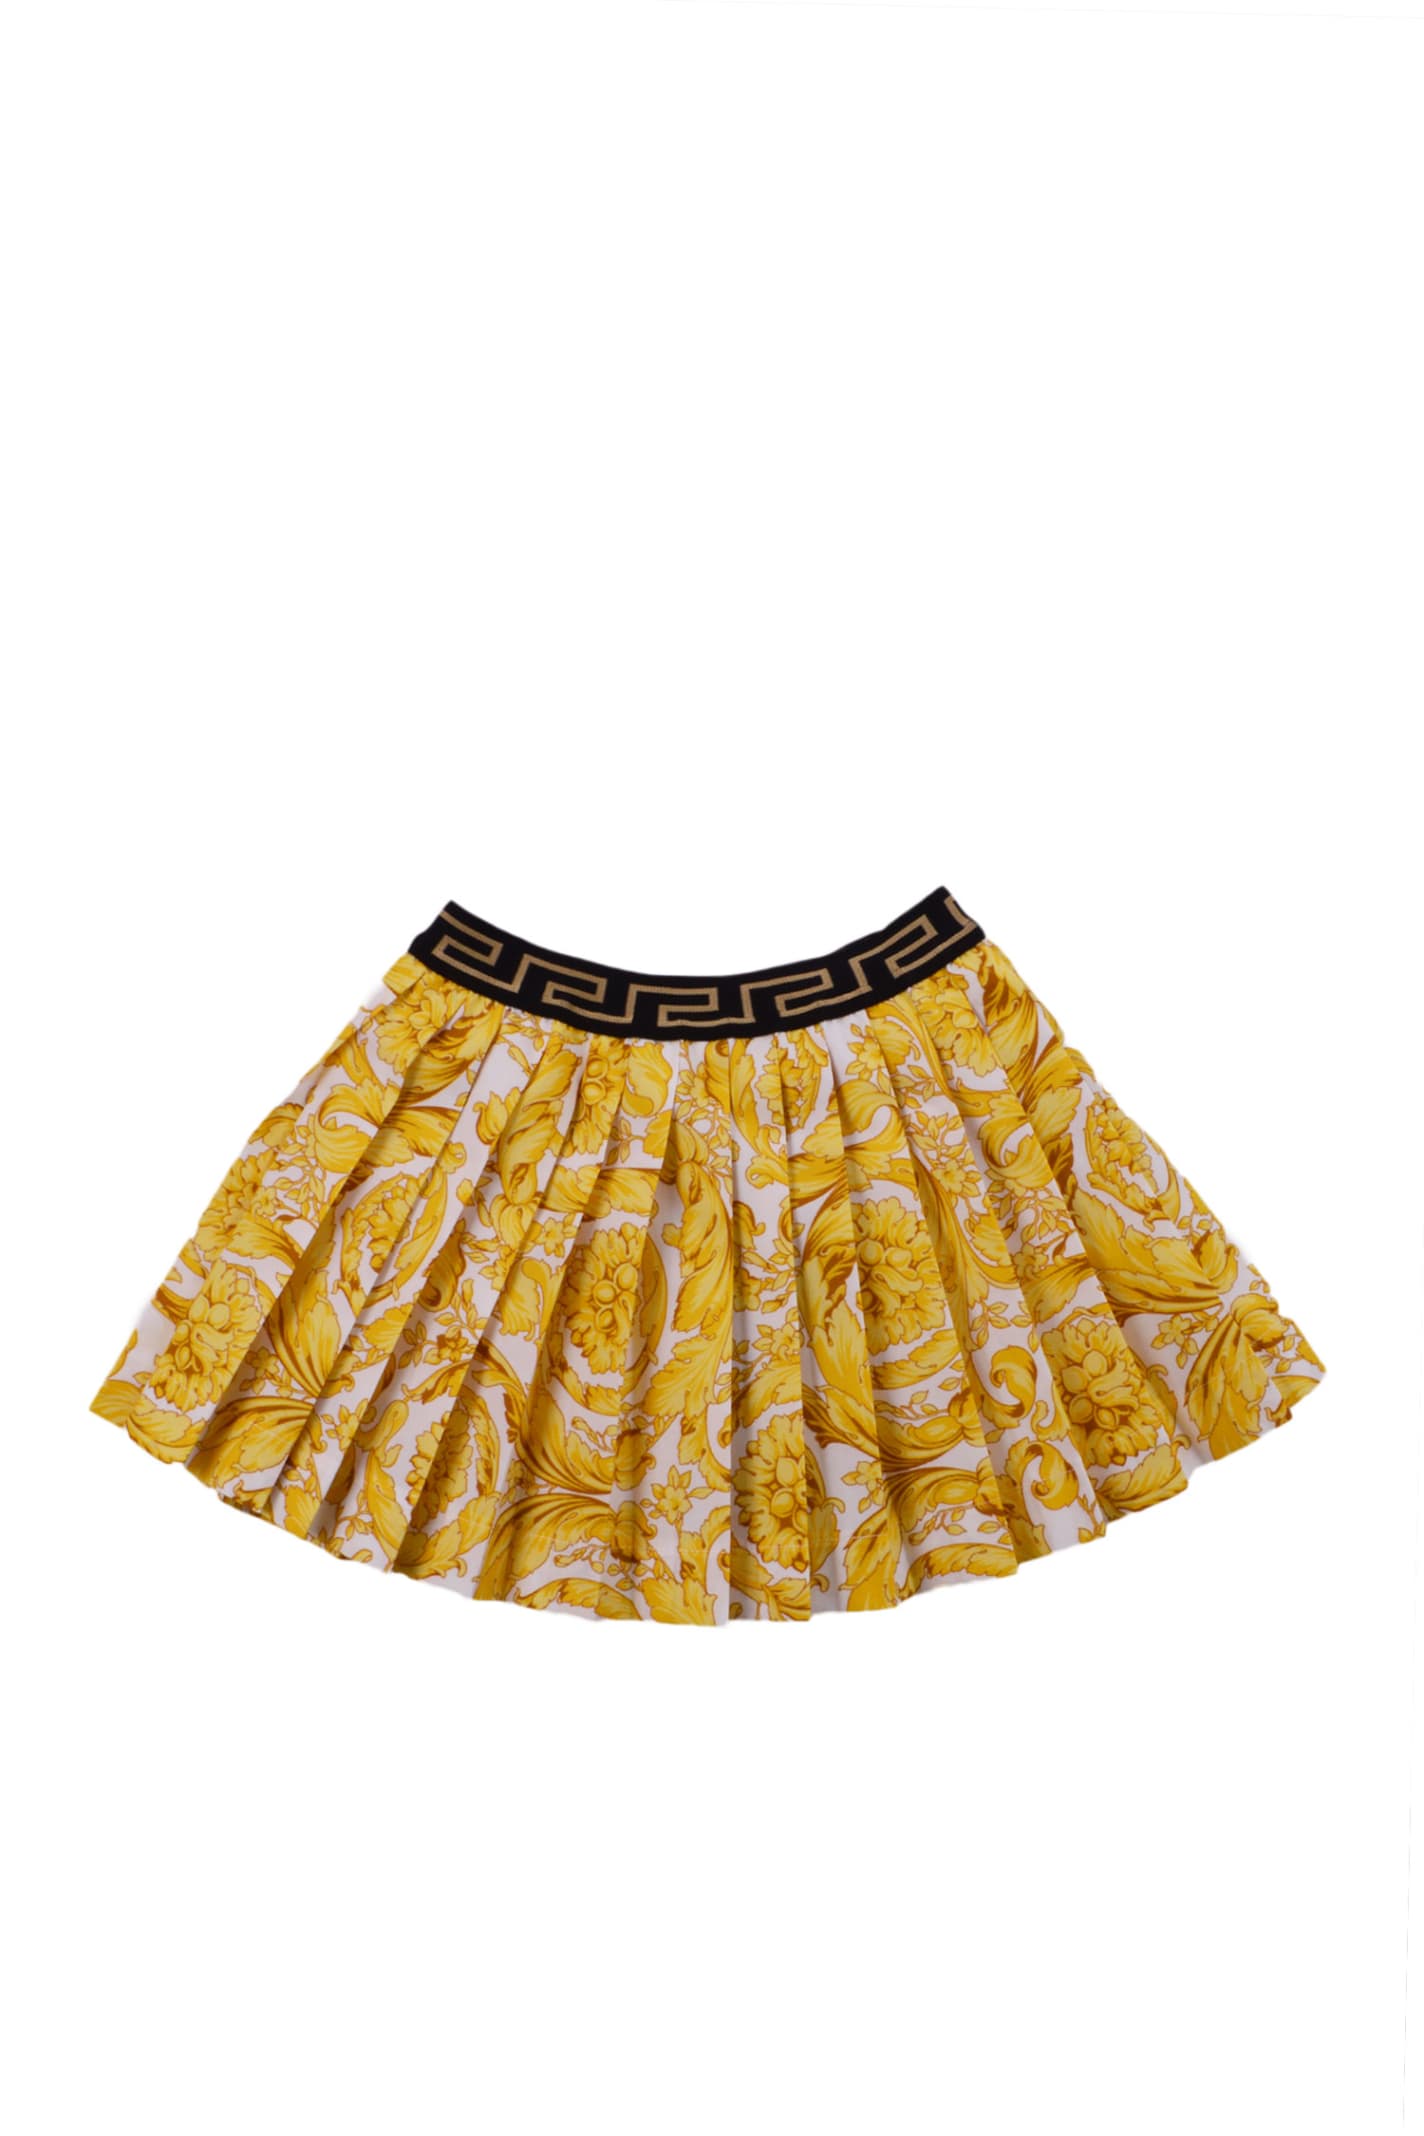 VERSACE PLEATED SKIRT WITH BAROQUE PRINT